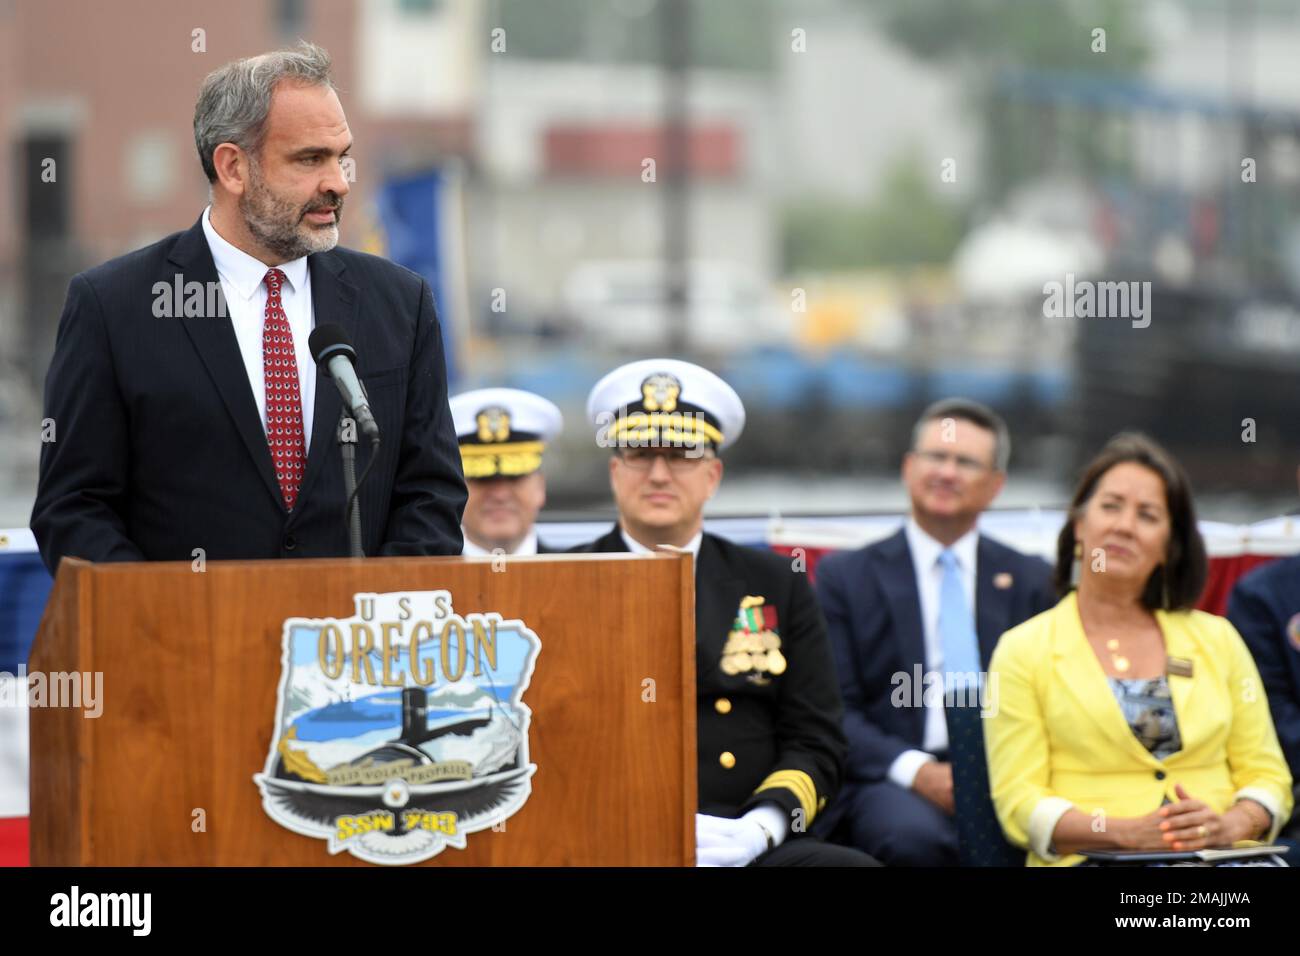 220528-N-GR655-0087 GROTON, Connecticut (May 28, 2022) – Tommy Ross, performing the duties of Assistant Secretary of the Navy for Research, Development, and Acquisition, delivers remarks during a commissioning ceremony for the Virginia-class fast attack submarine USS Oregon (SSN 793) in Groton, Conn., May 28, 2022. SSN 793, the third U.S Navy ship launched with the name Oregon and first in more than a century, is a flexible, multi-mission platform designed to carry out the seven core competencies of the submarine force: anti-submarine warfare; anti-surface warfare; delivery of special operatio Stock Photo